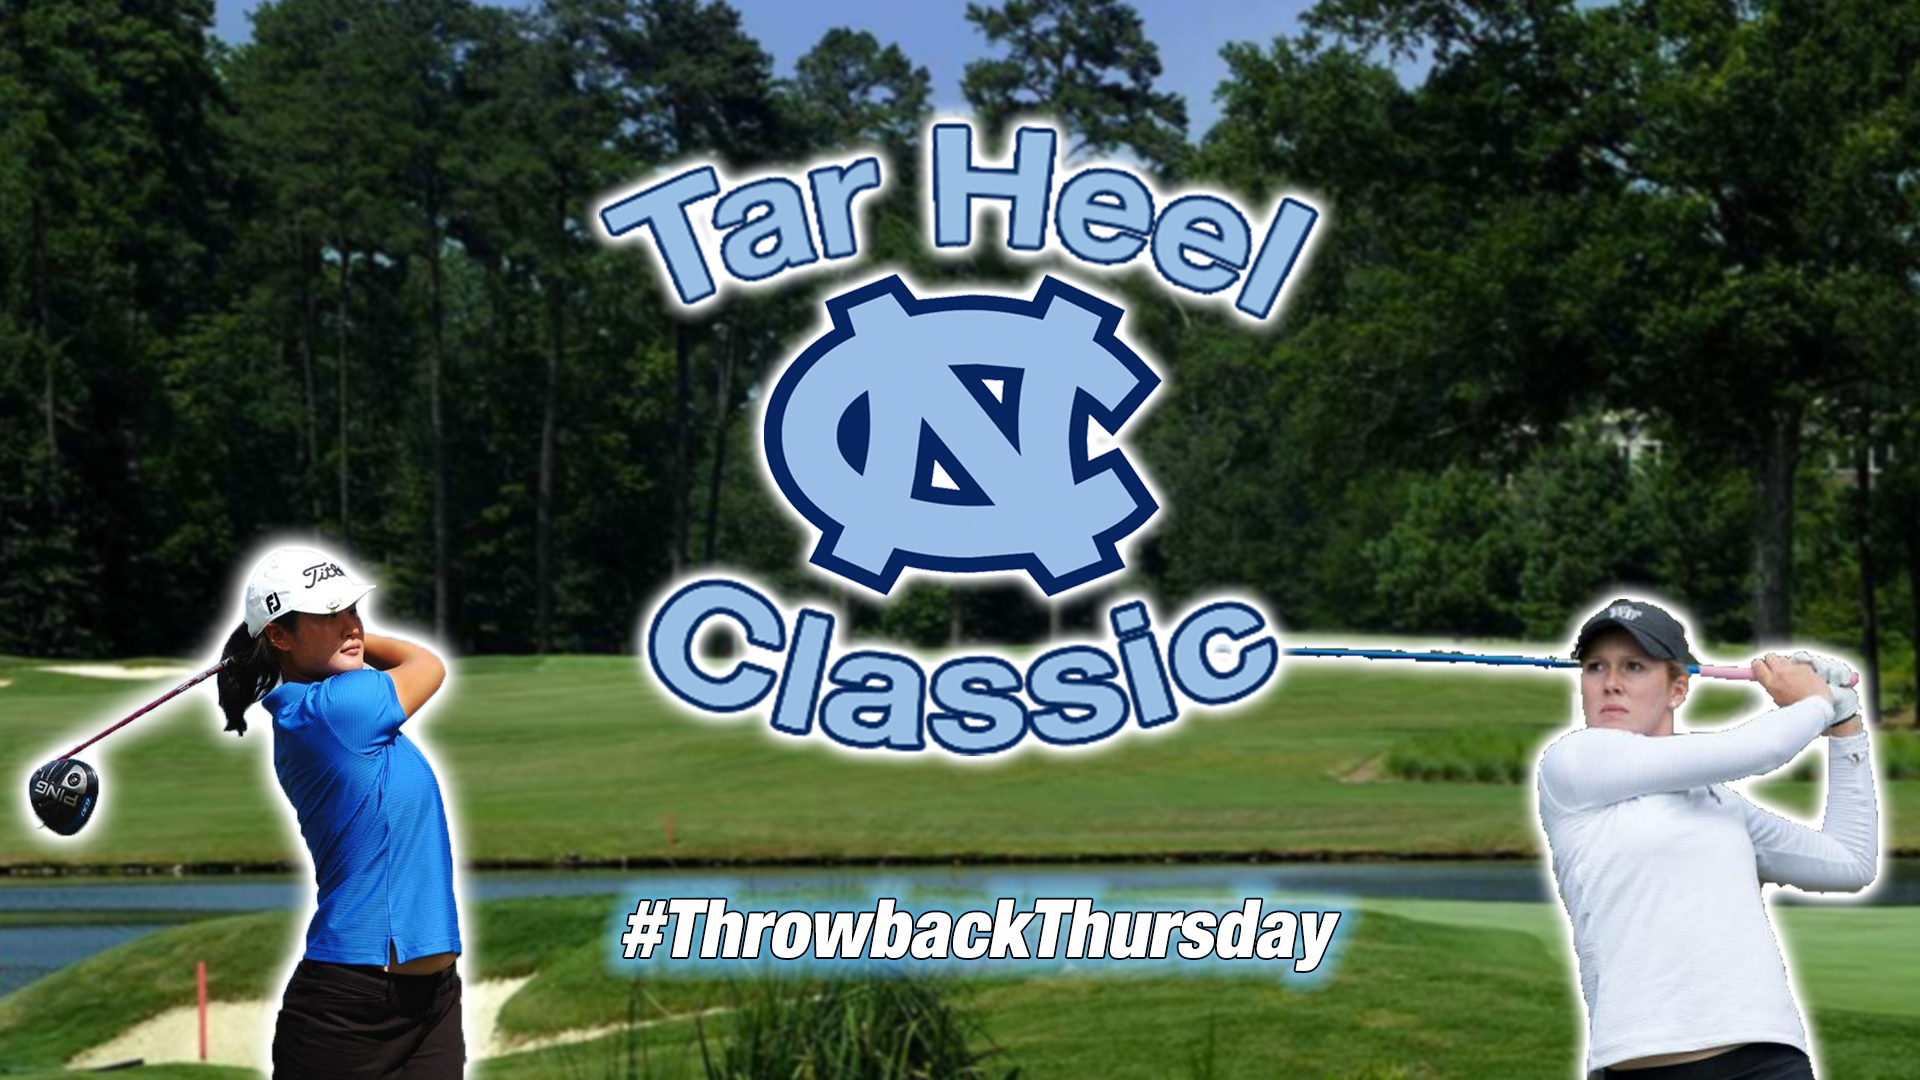 #ThrowbackThursday: The Tar Heel Classic Ten Year Challenge